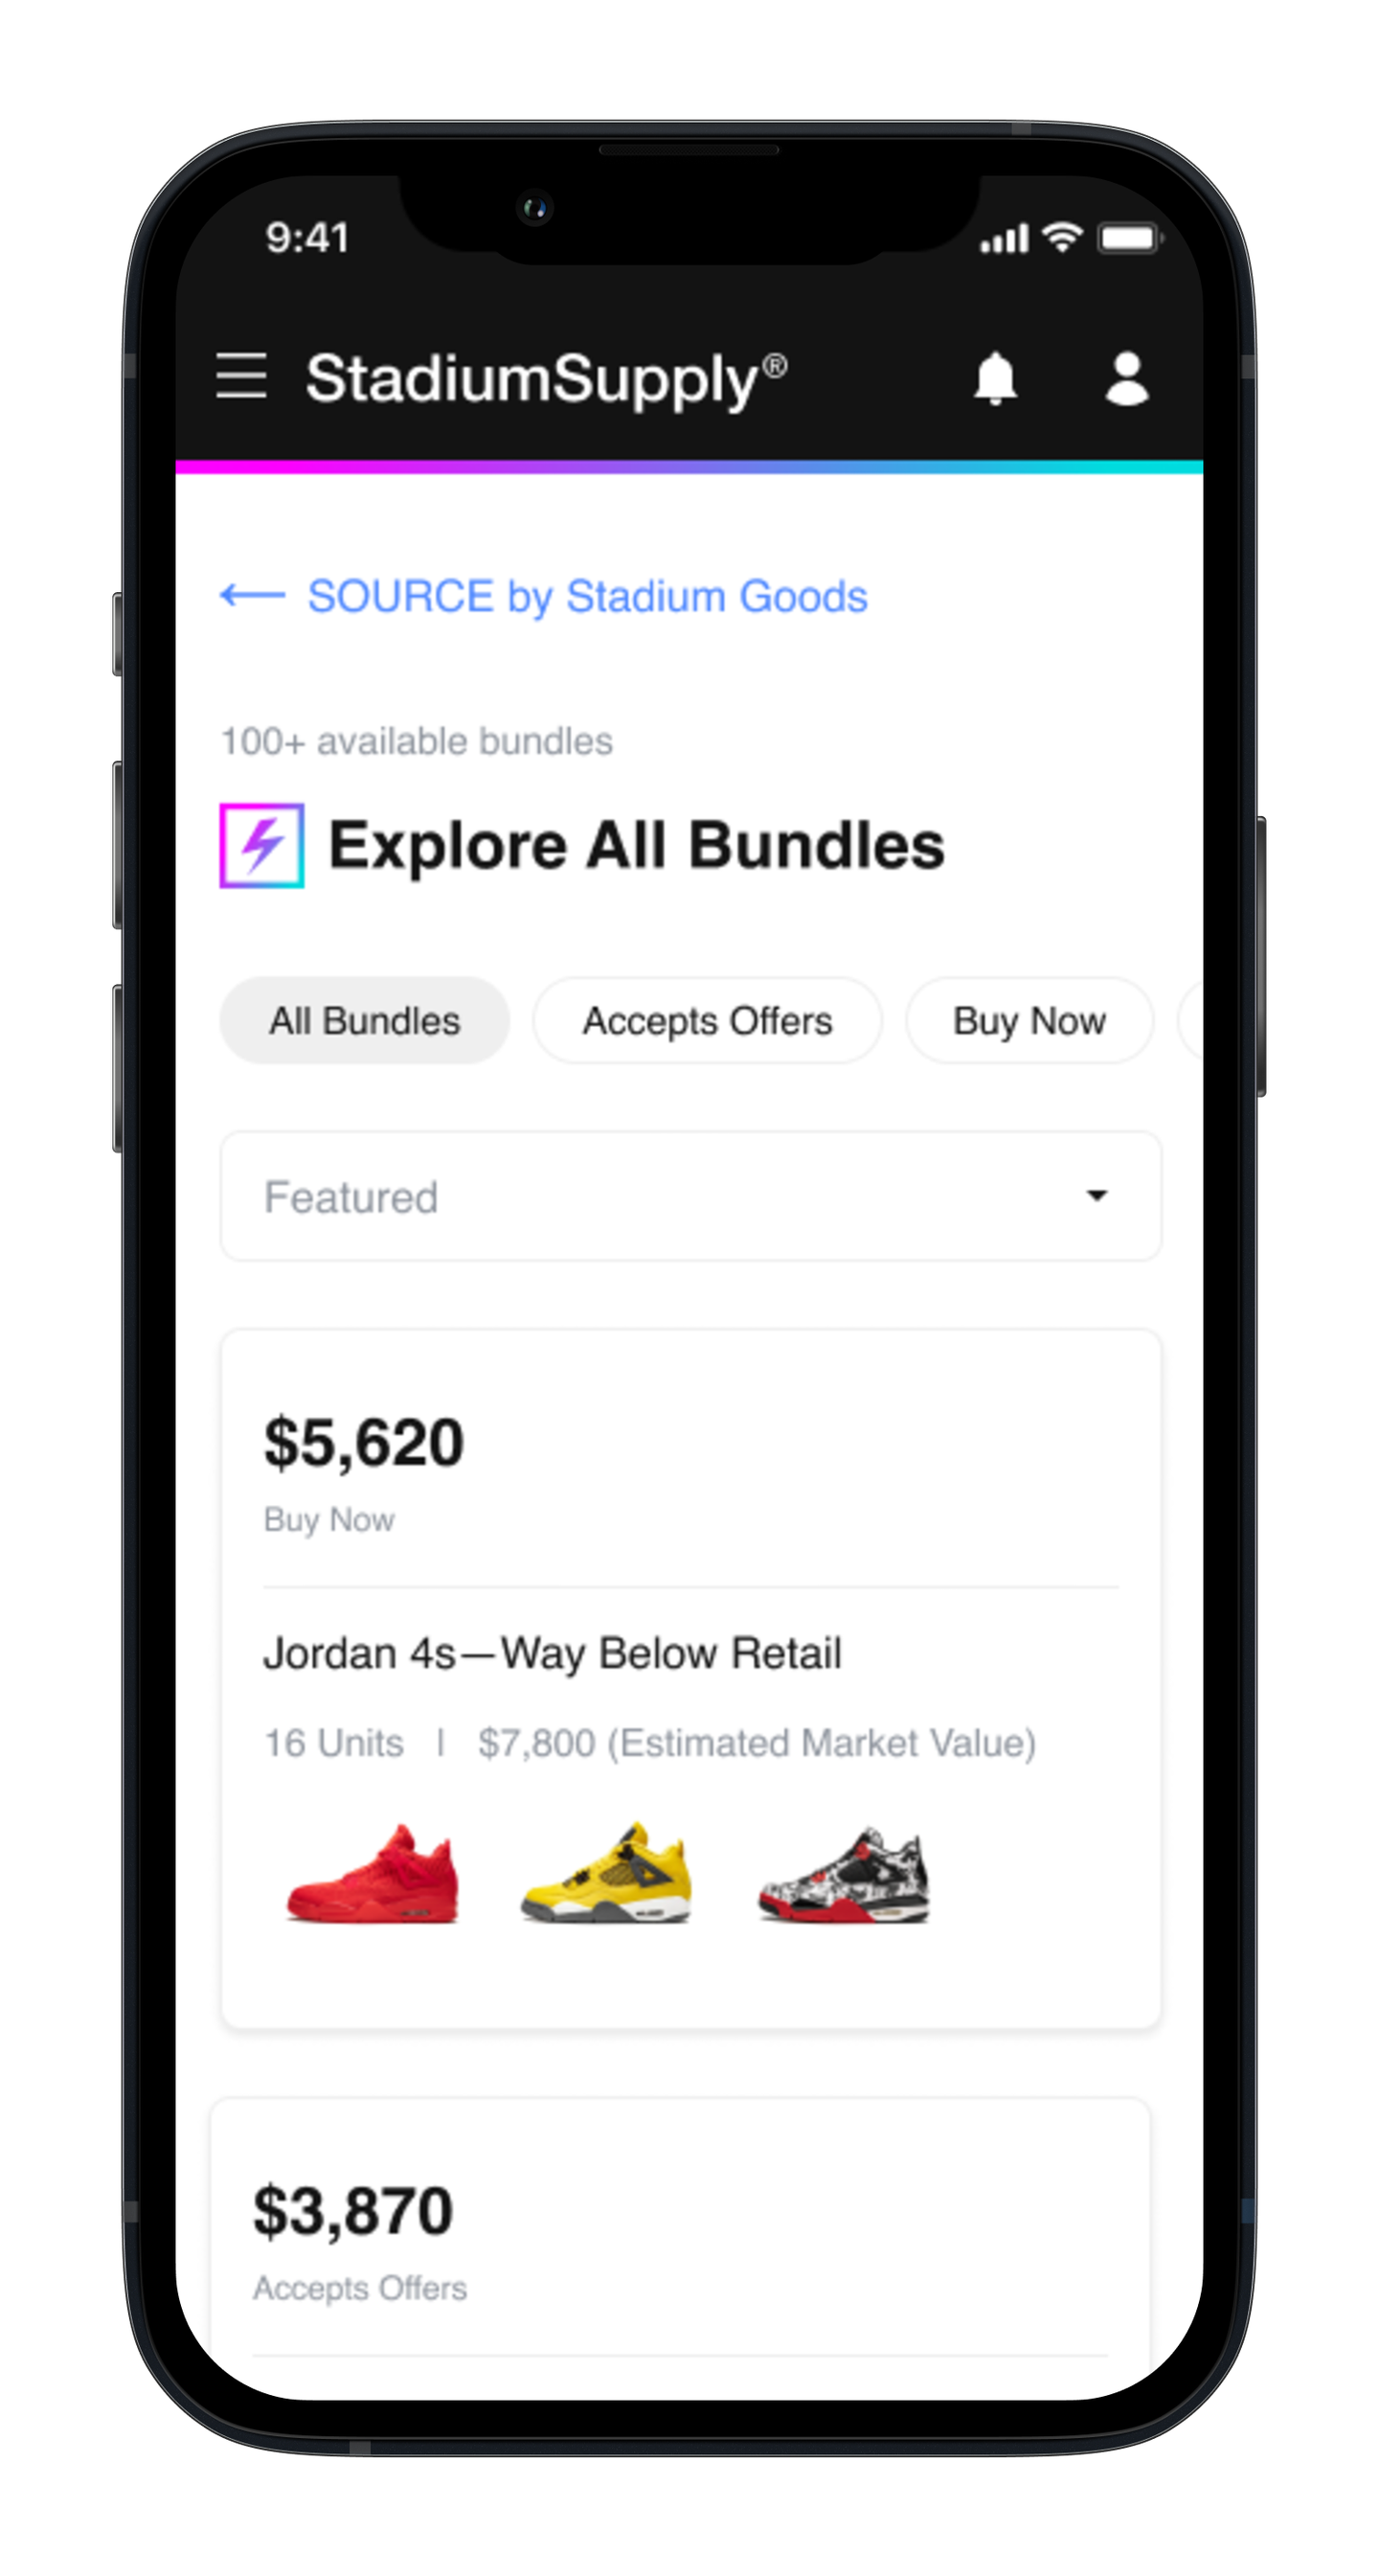 The Stadium Goods app shows a page where a buyer can select different bundles available, including one costing $5,620.